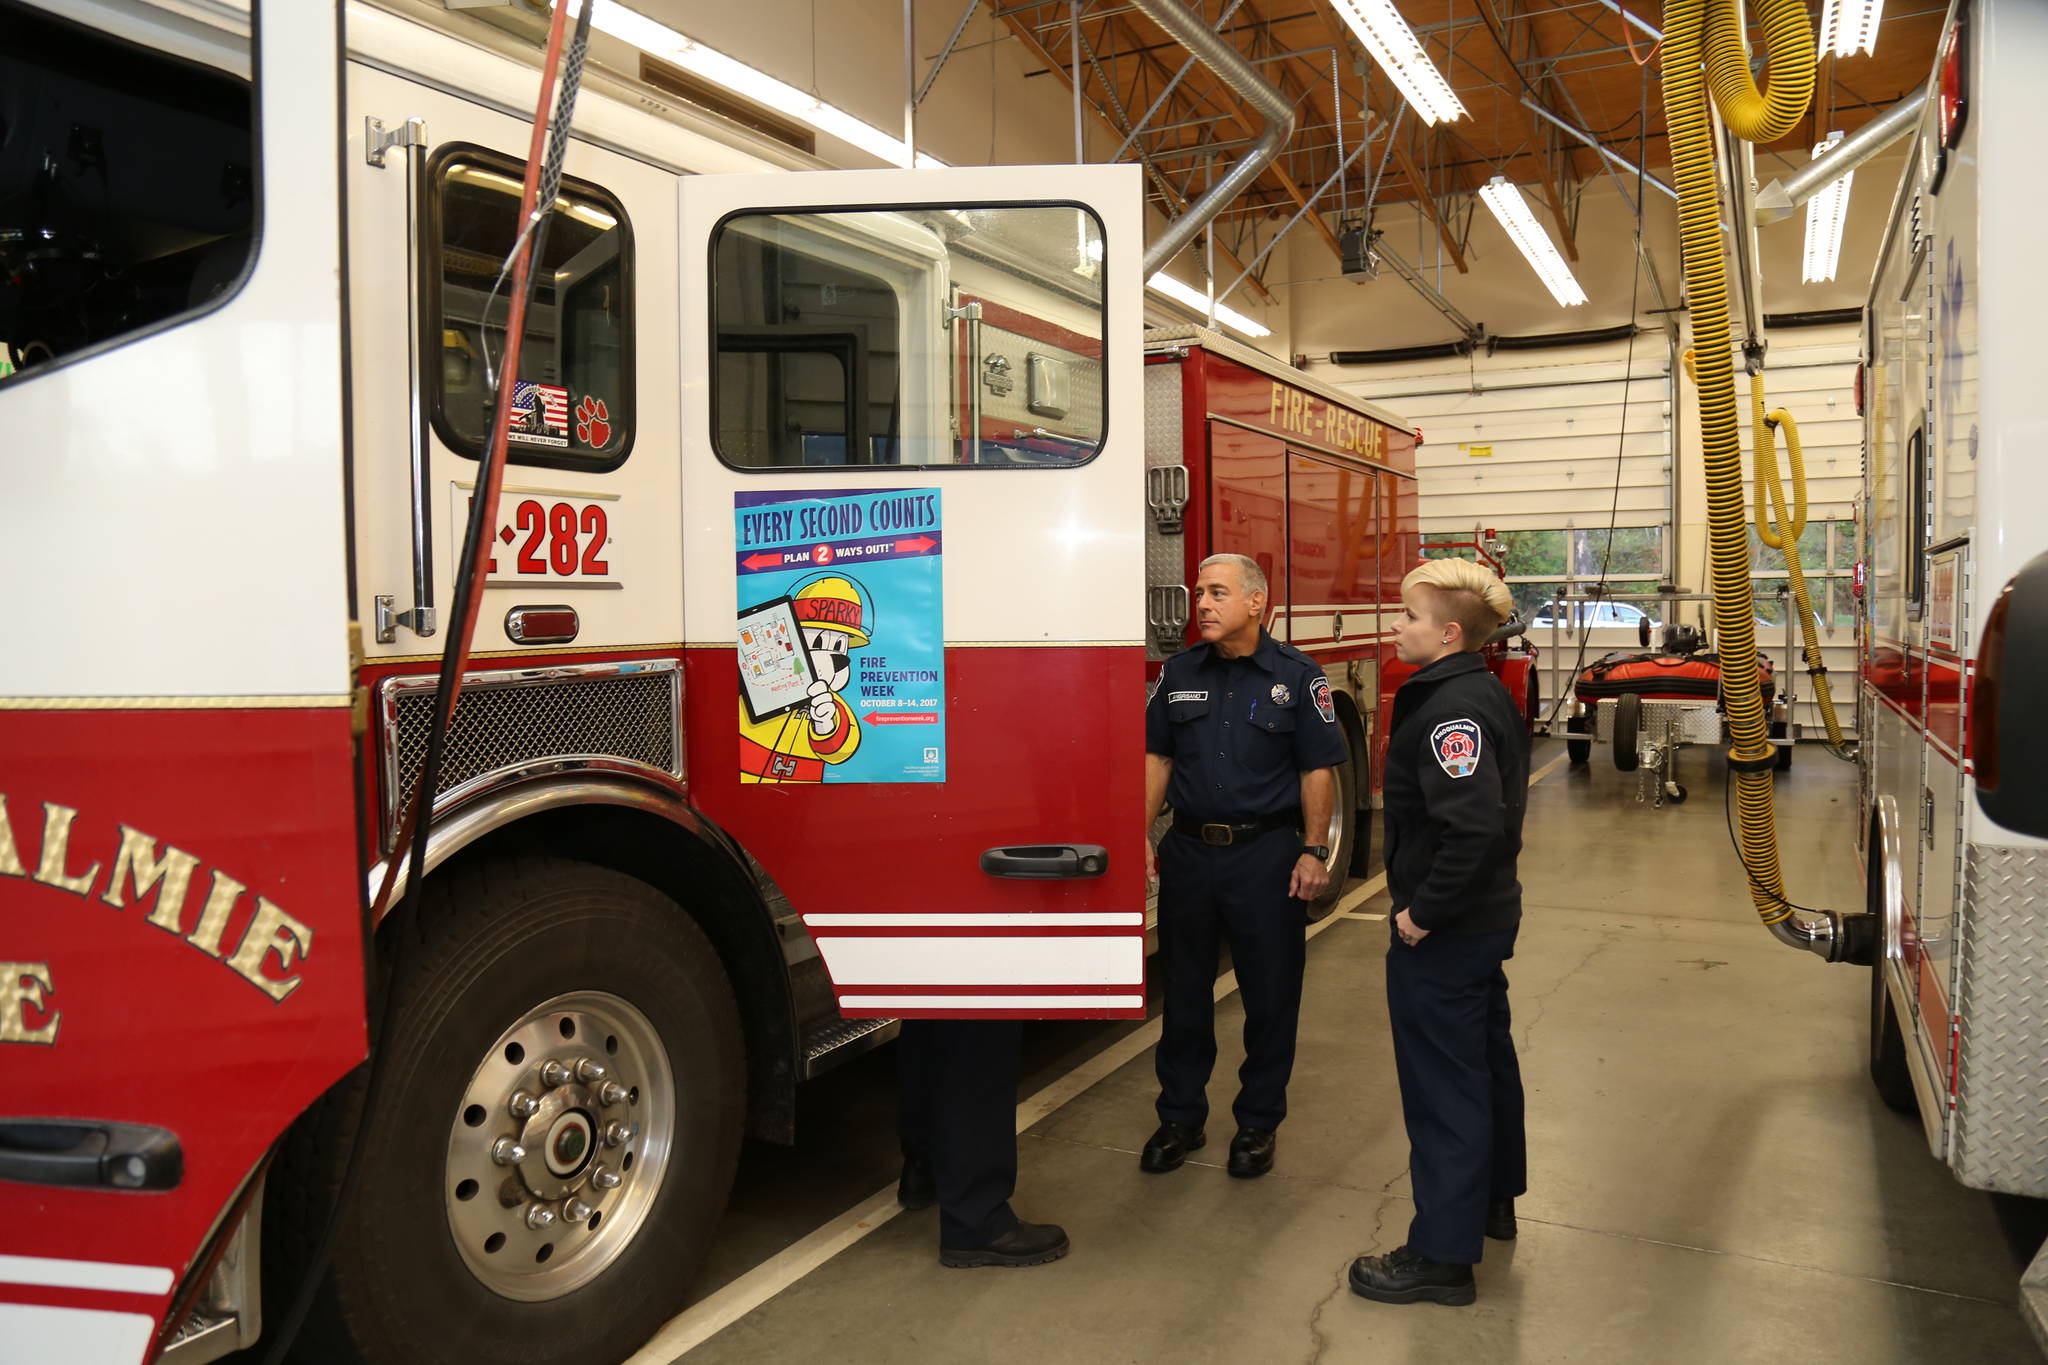 Snoqualmie volunteer firefighter Robert Angrisano, left, and career firefighter Theresa Tozier were both honored with awards during the Snoqualmie Fire Department’s annual dinner in March 2021. Contributed by the Snoqualmie Fire Department